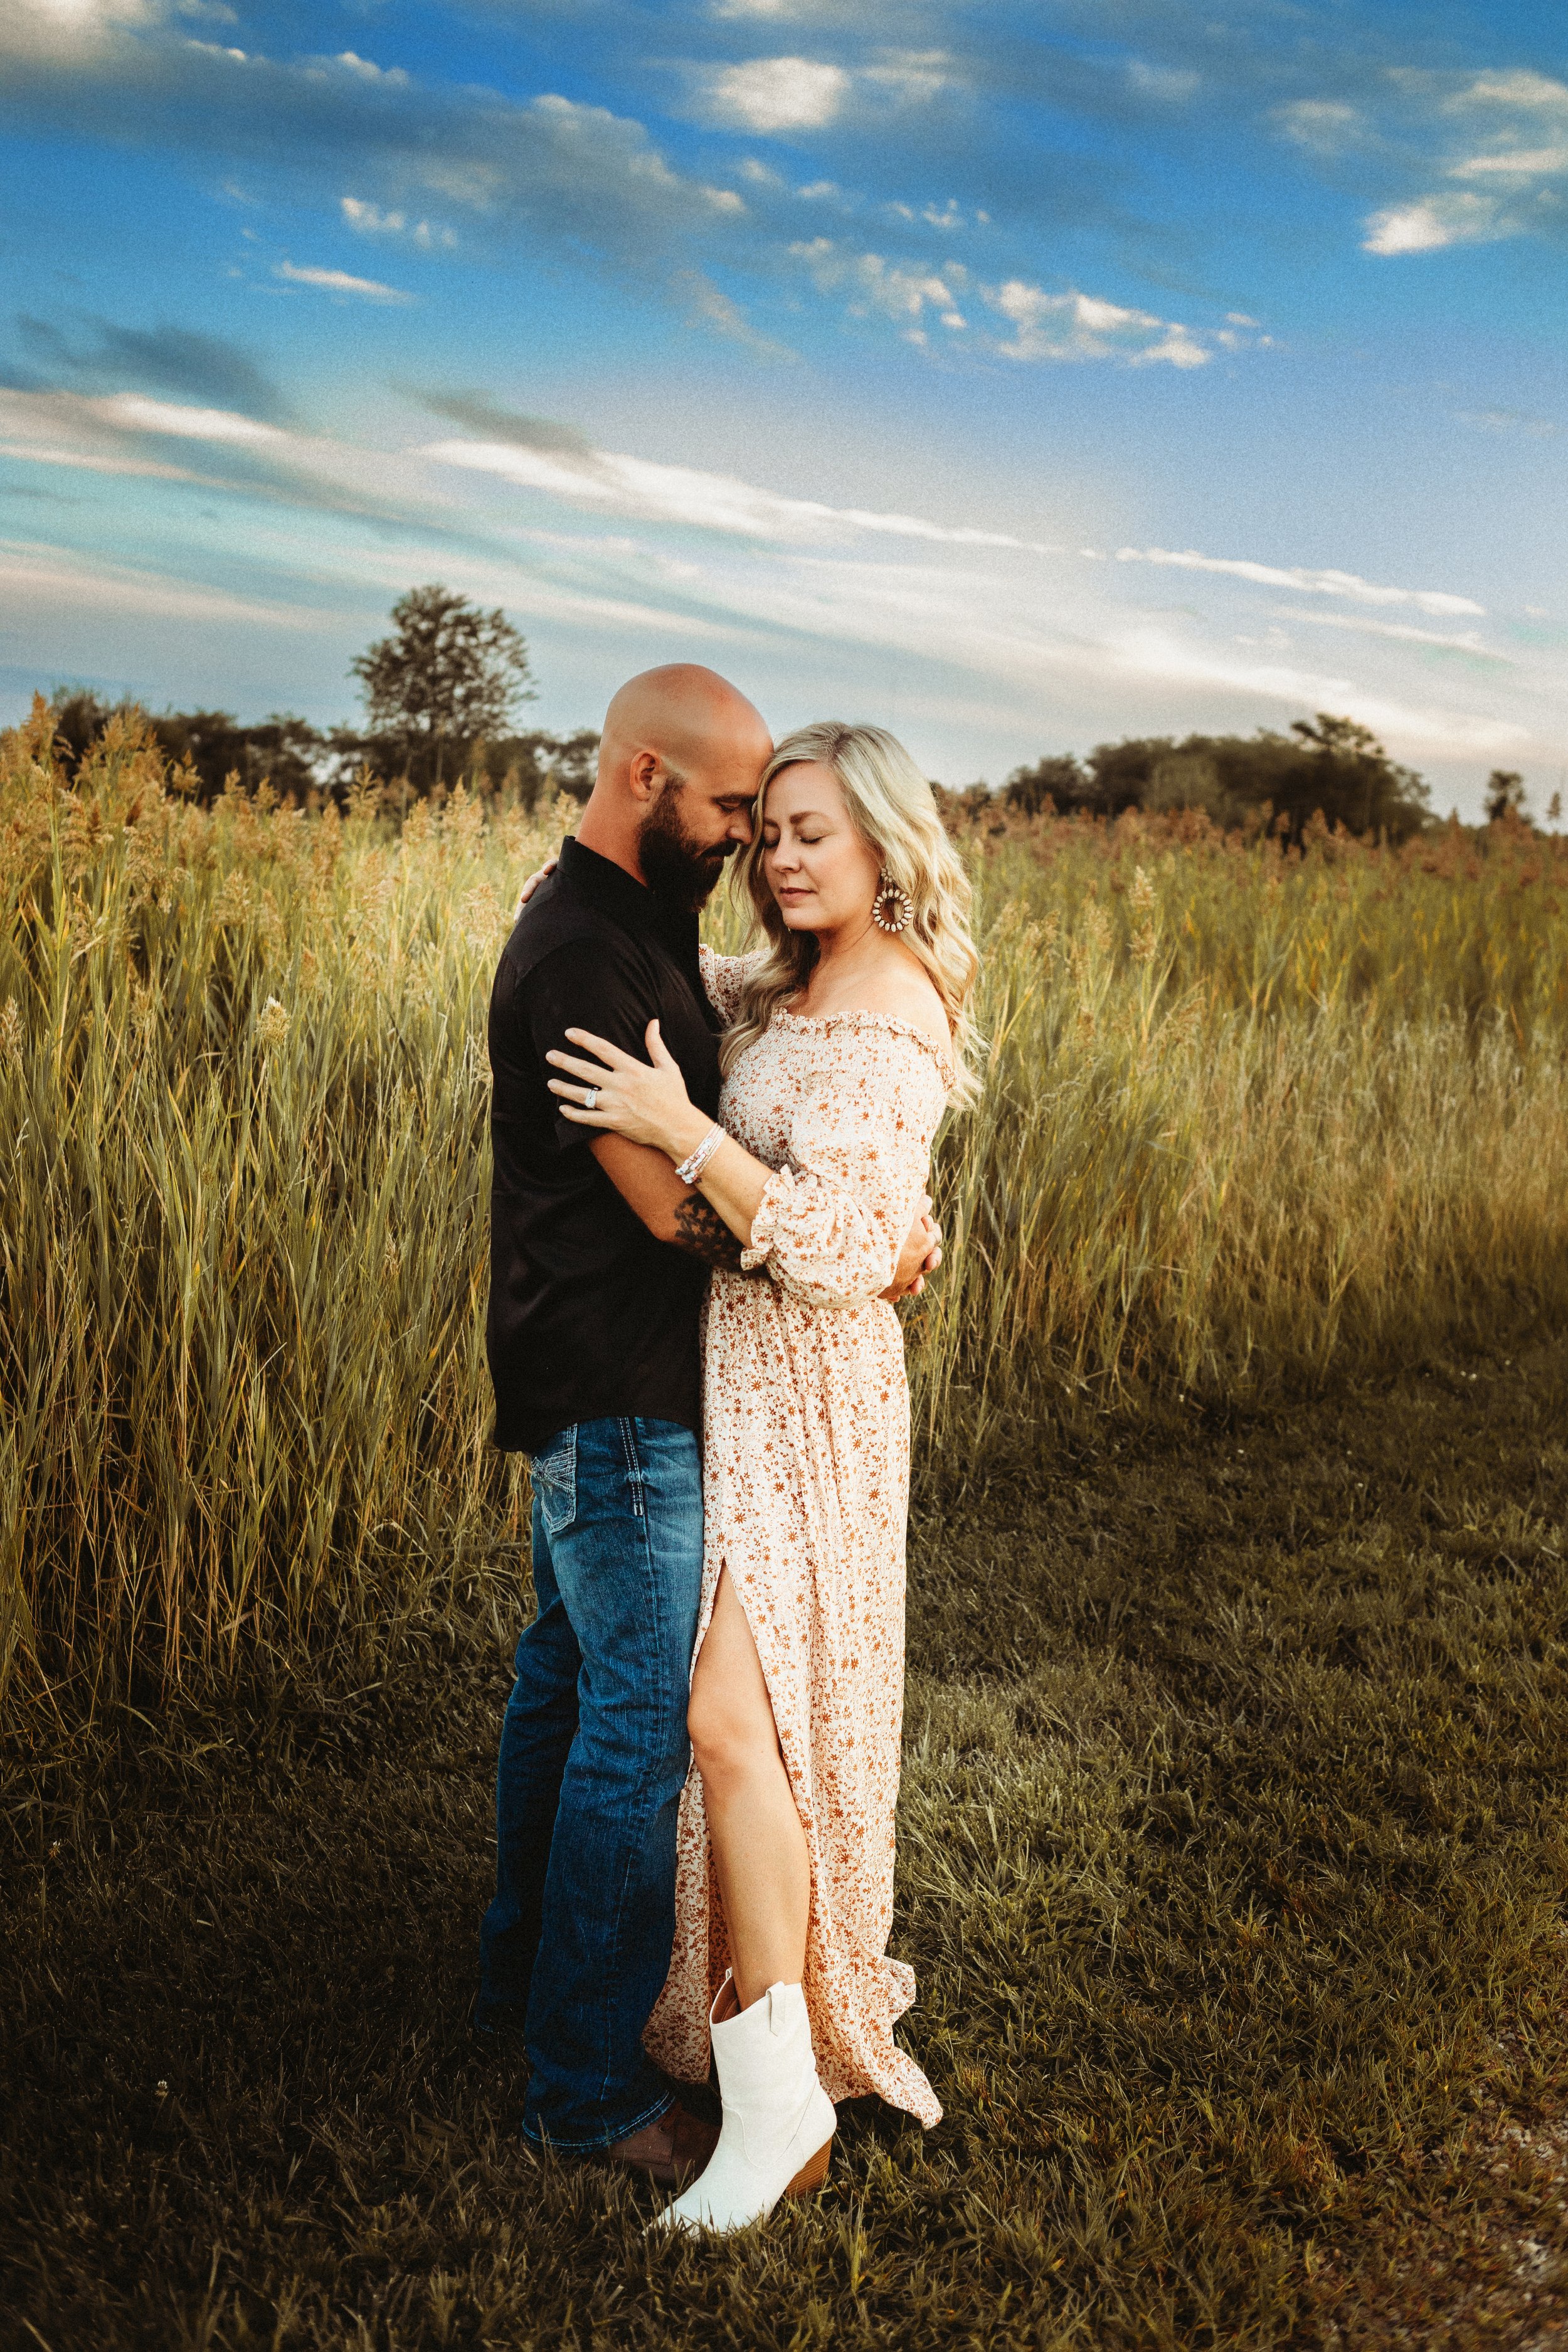  A man embraces his wife during a family photoshoot in Illinois by Teala Ward Photography. Illinois Valley Family Pictures #TealaWardPhotography #IllinoisValleyPhotographer #midwestphotography #TealaWardFamilies #Illinoisfamilypictures 